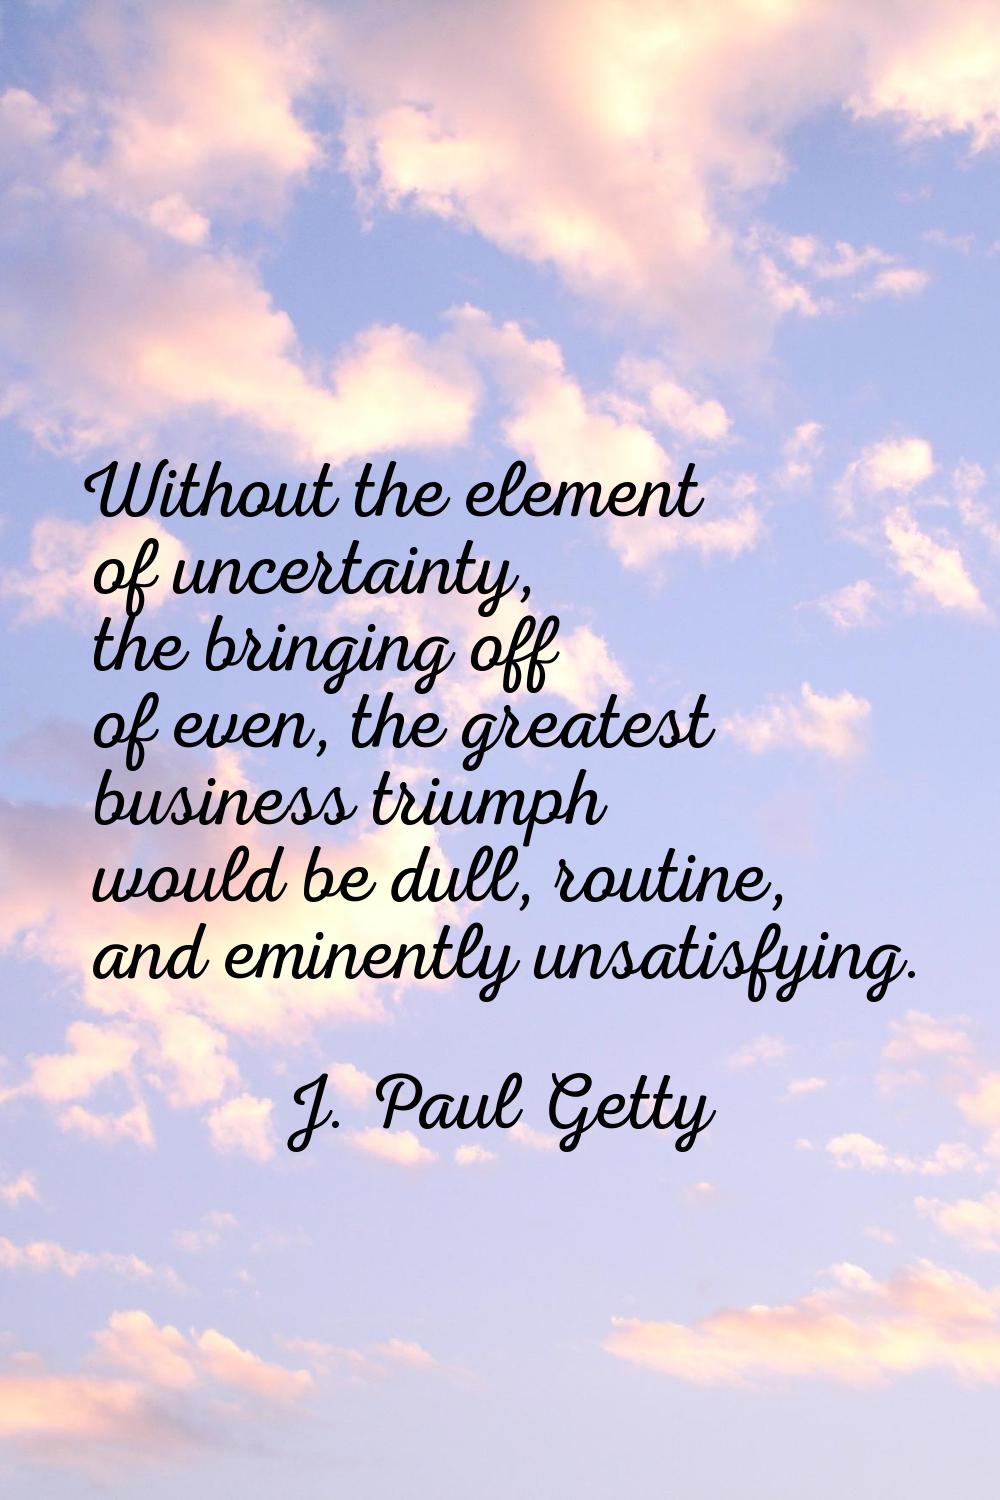 Without the element of uncertainty, the bringing off of even, the greatest business triumph would b